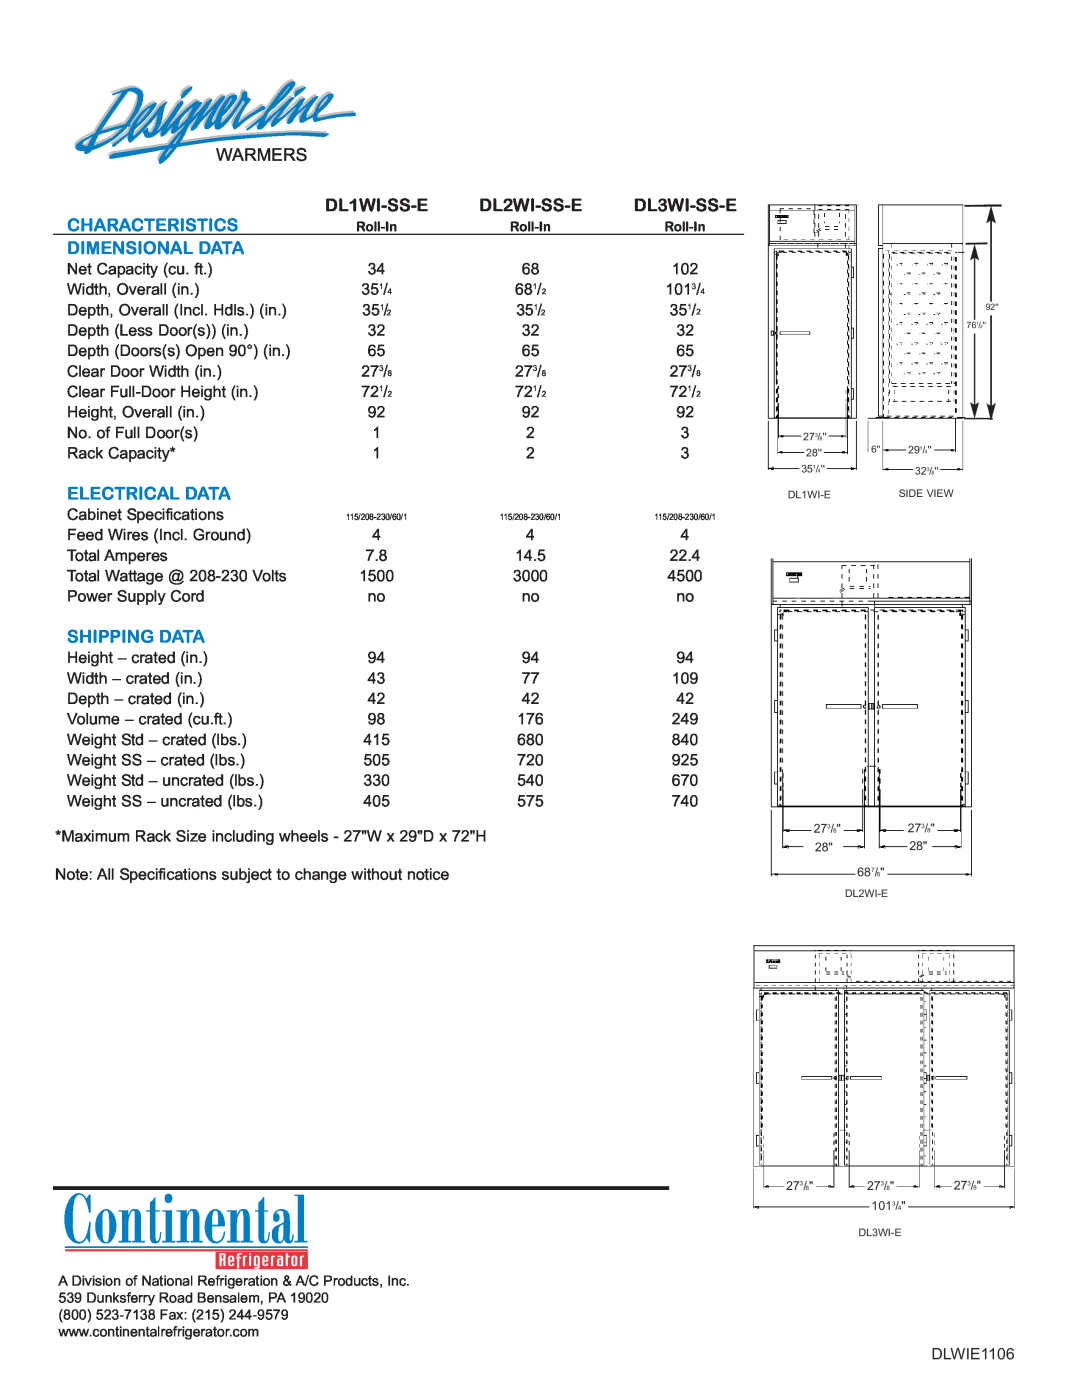 Continental DL1WI-SS-E Warmers, Characteristics, DL2WI-SS-E, DL3WI-SS-E, Dimensional Data, Electrical Data, Shipping Data 